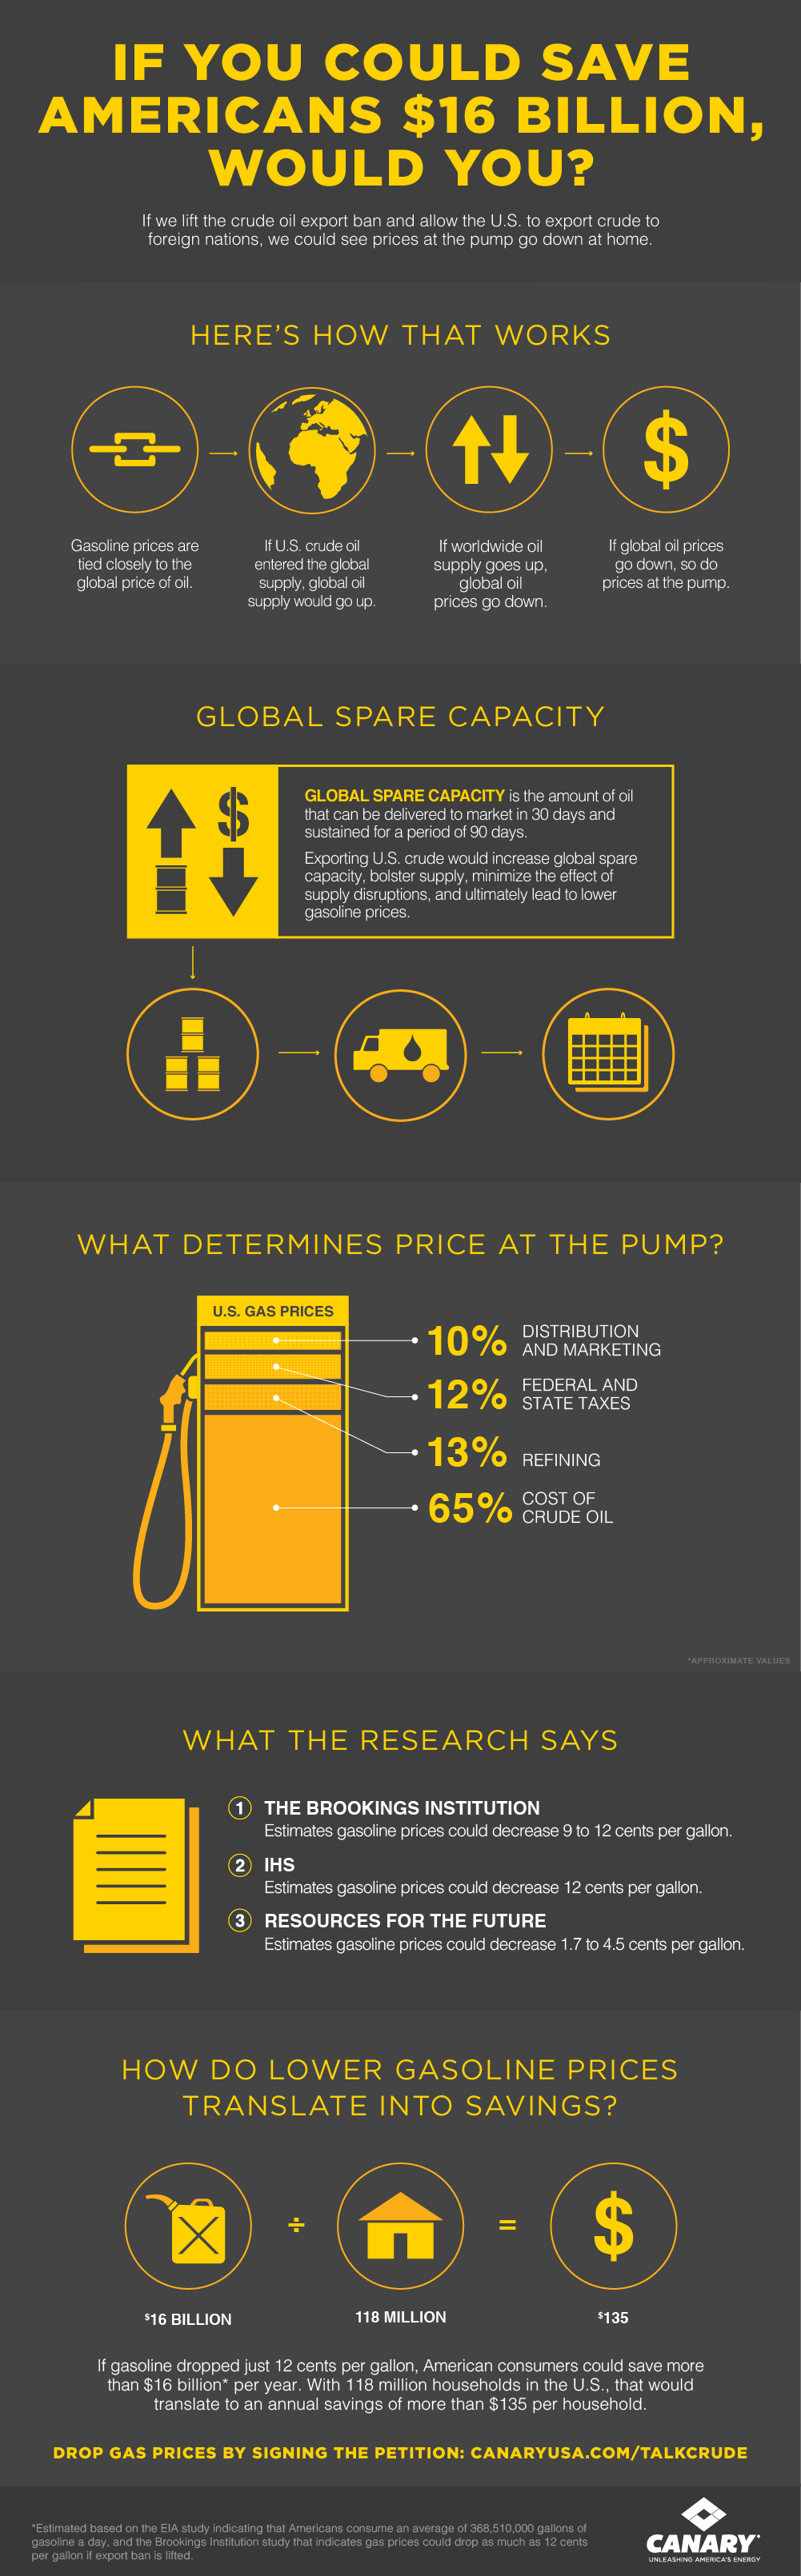 Lower Gas Prices_FINAL_V1_141023